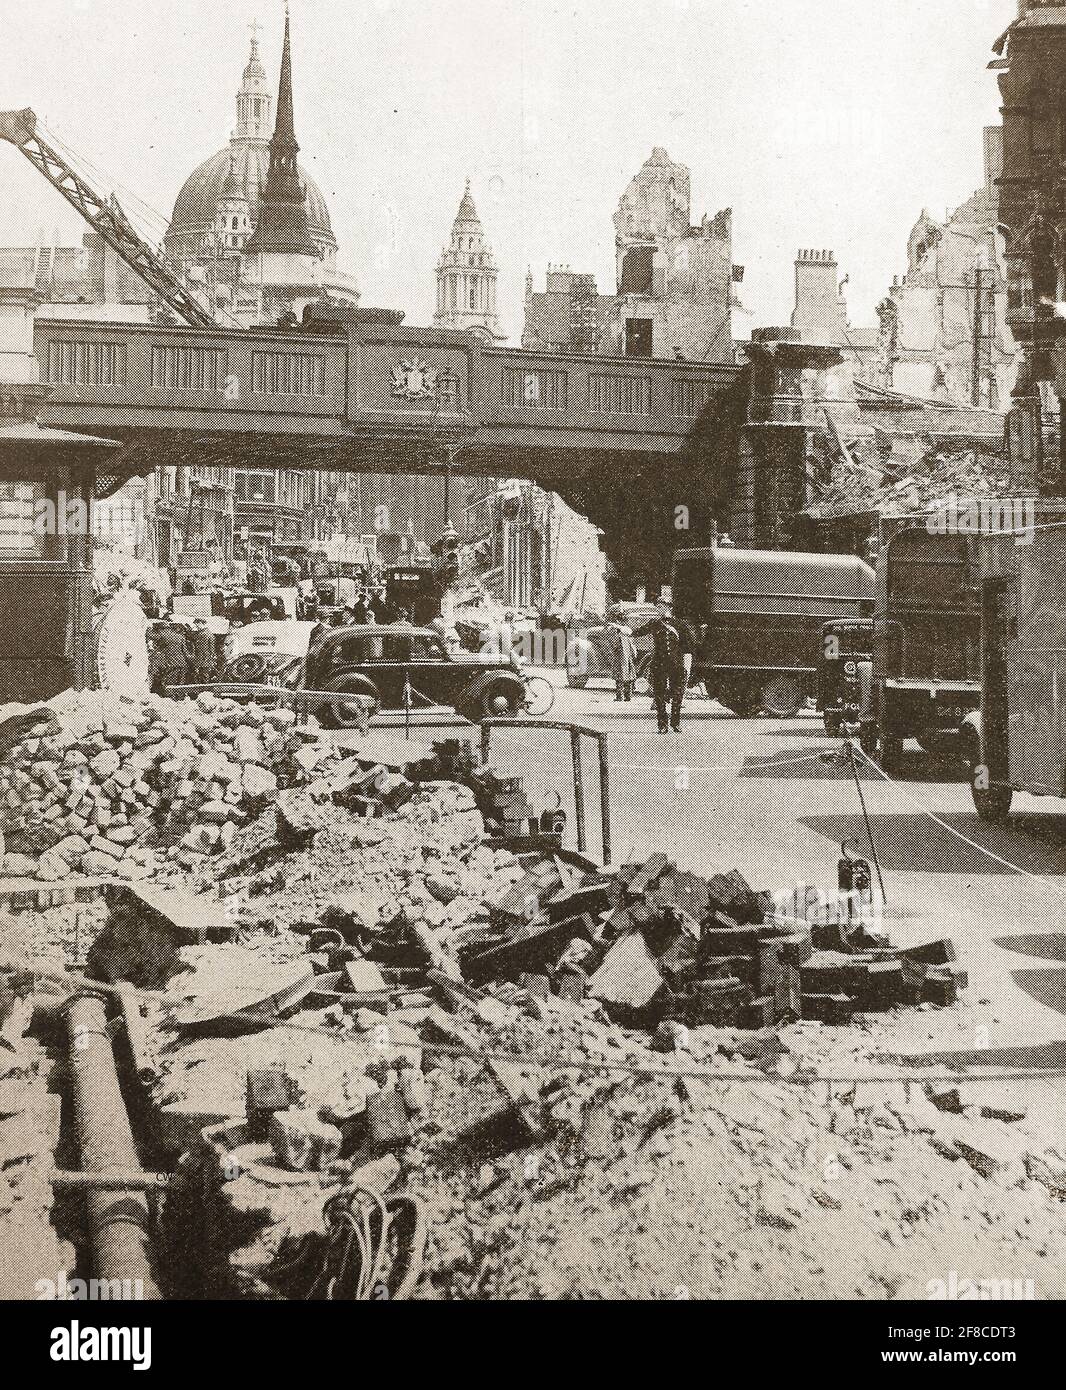 1940 The blitz - Newspaper image -Looking up Ludgate Hill, London towards St Paul's Cathedral the morning after an an air raid by German bombers. Stock Photo